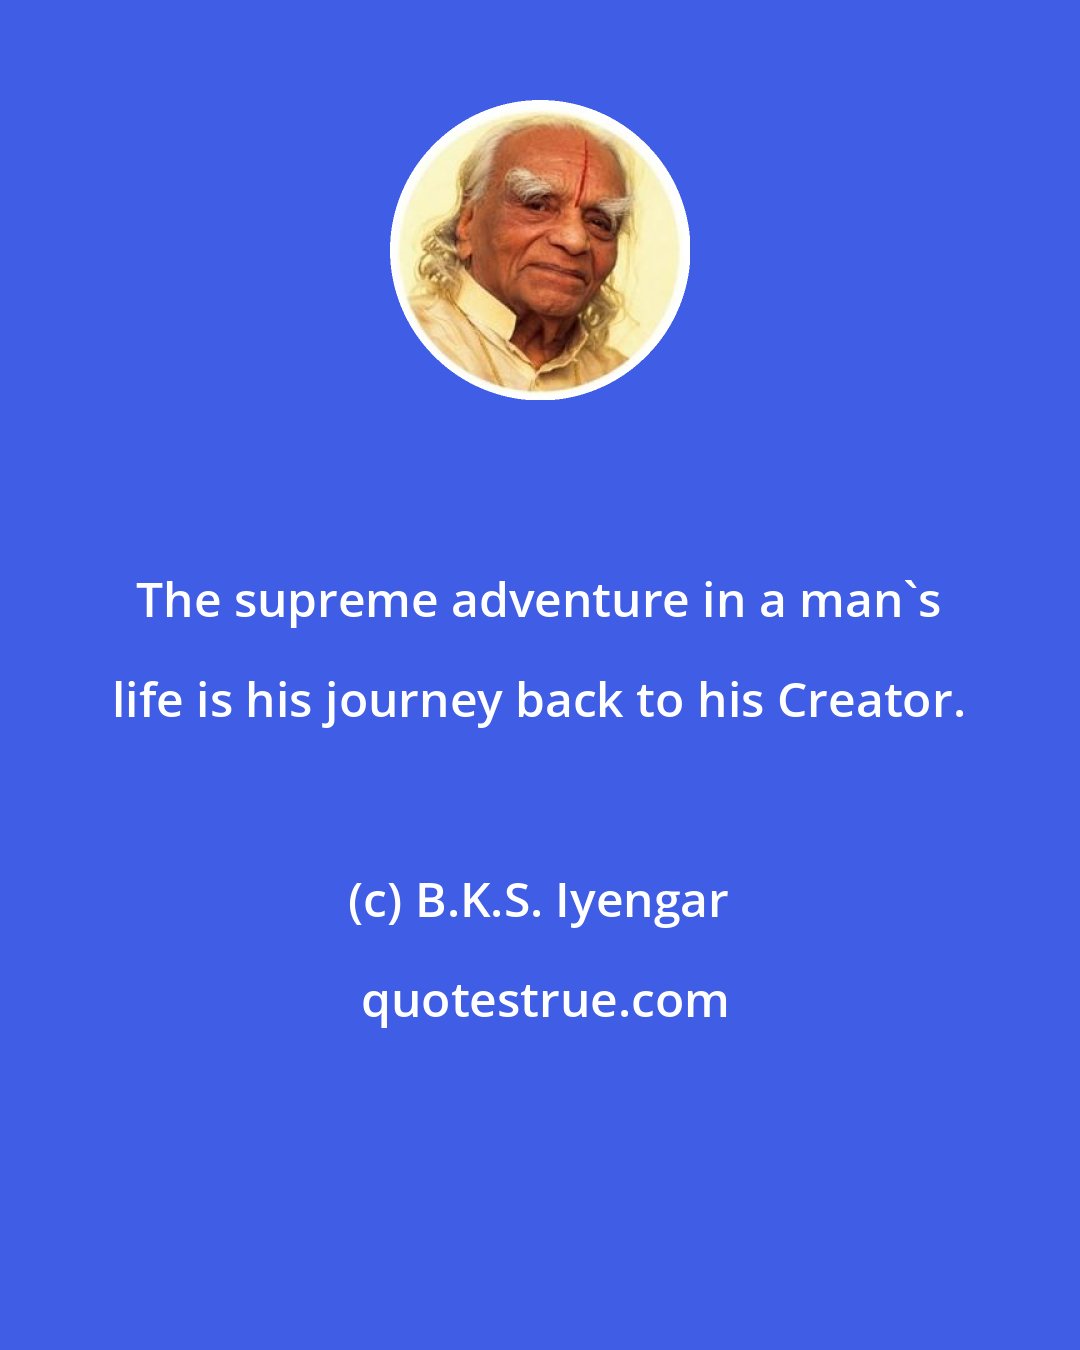 B.K.S. Iyengar: The supreme adventure in a man's life is his journey back to his Creator.